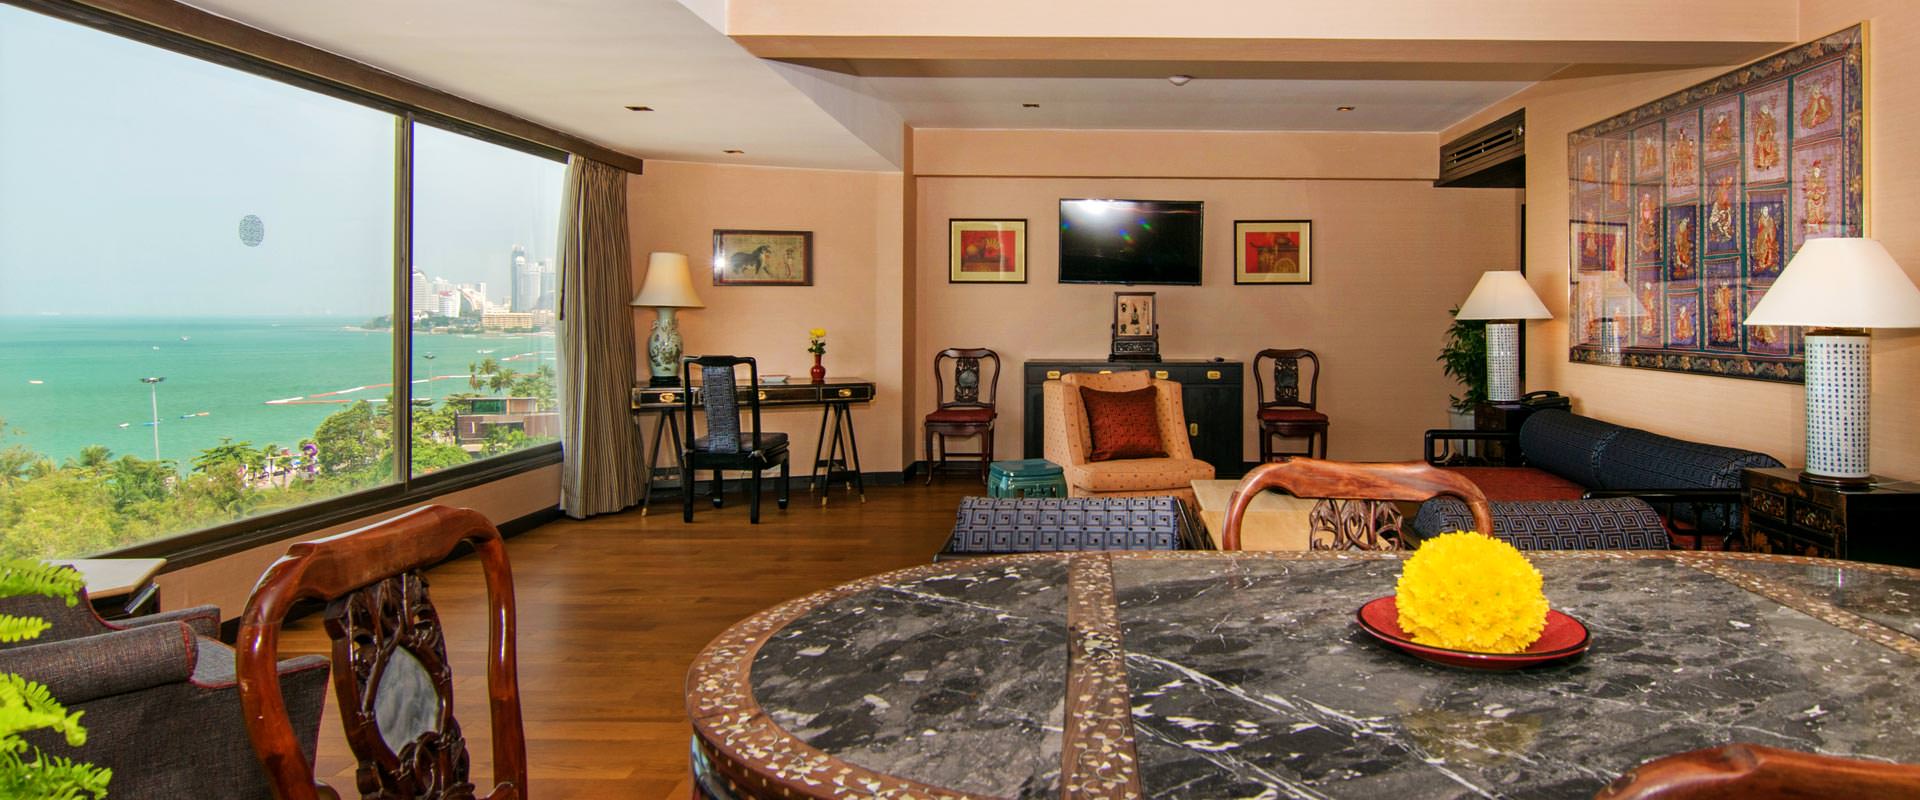 Deluxe Mandarin Suite at The Bayview Hotel Pattaya